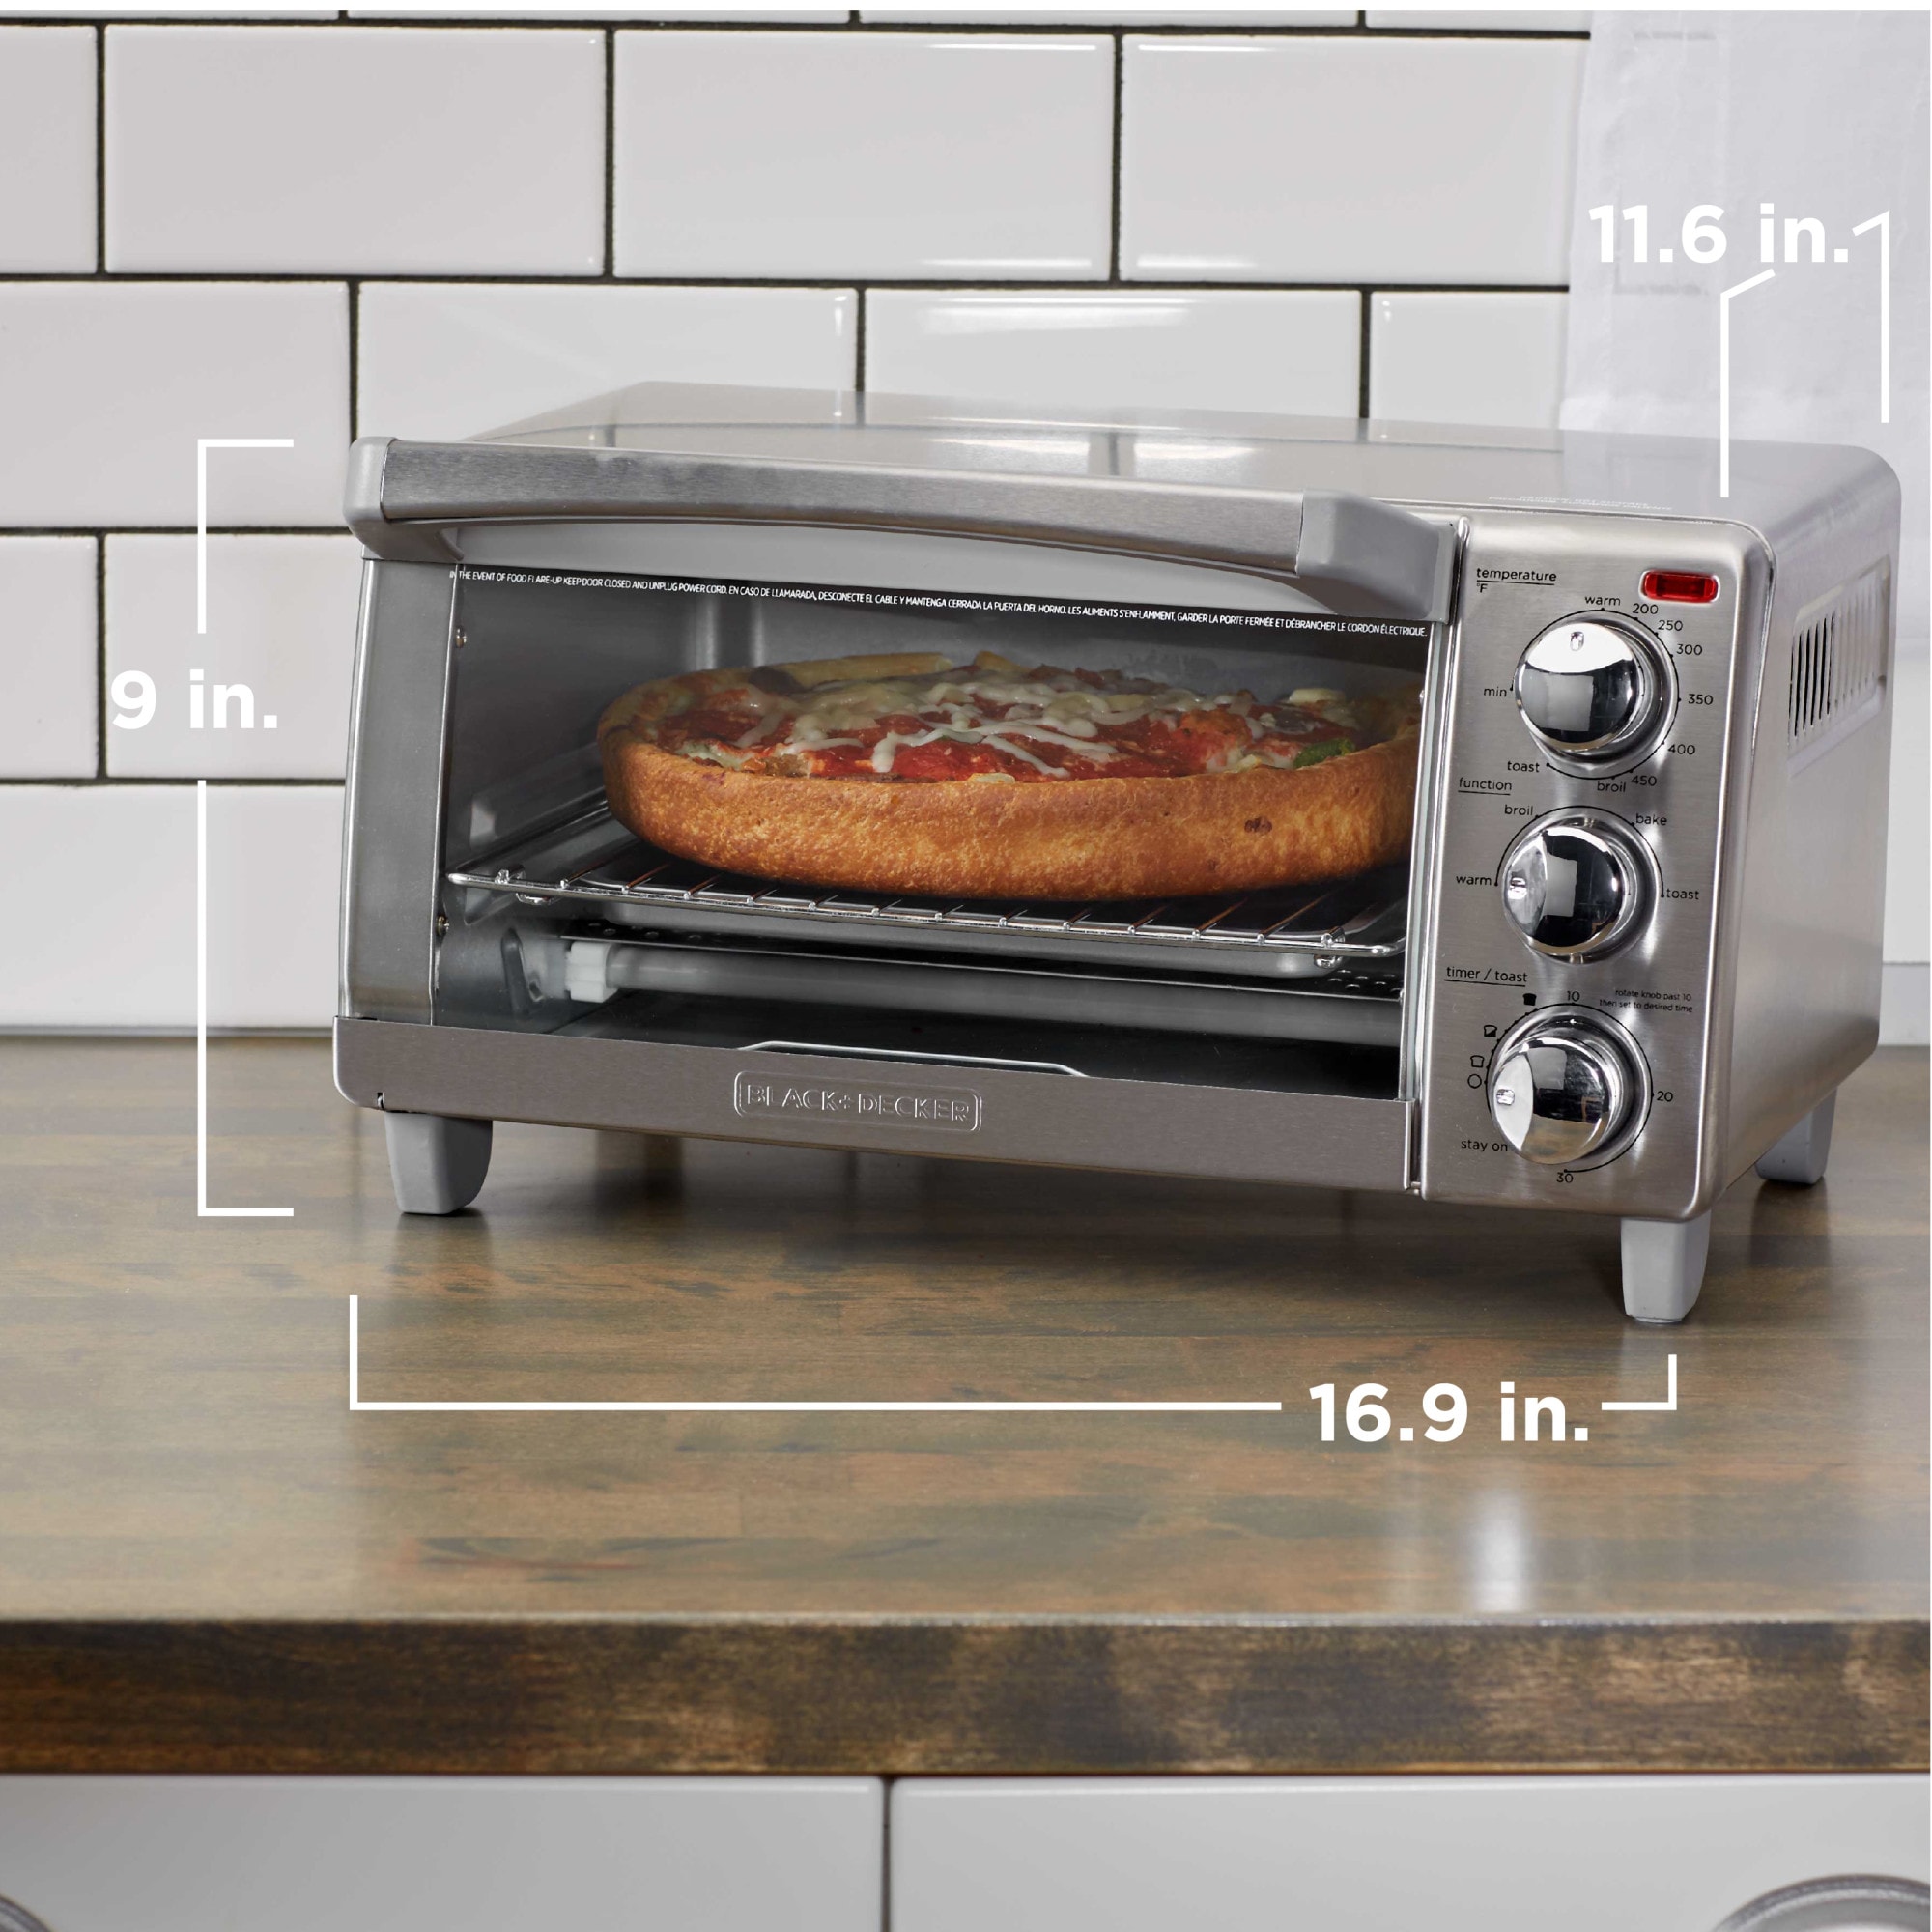  BLACK+DECKER TO3230SBD 6-Slice Convection Countertop Toaster  Oven, Includes Bake Pan, Broil Rack & Toasting Rack, Stainless Steel Convection  Toaster Oven: Home & Kitchen